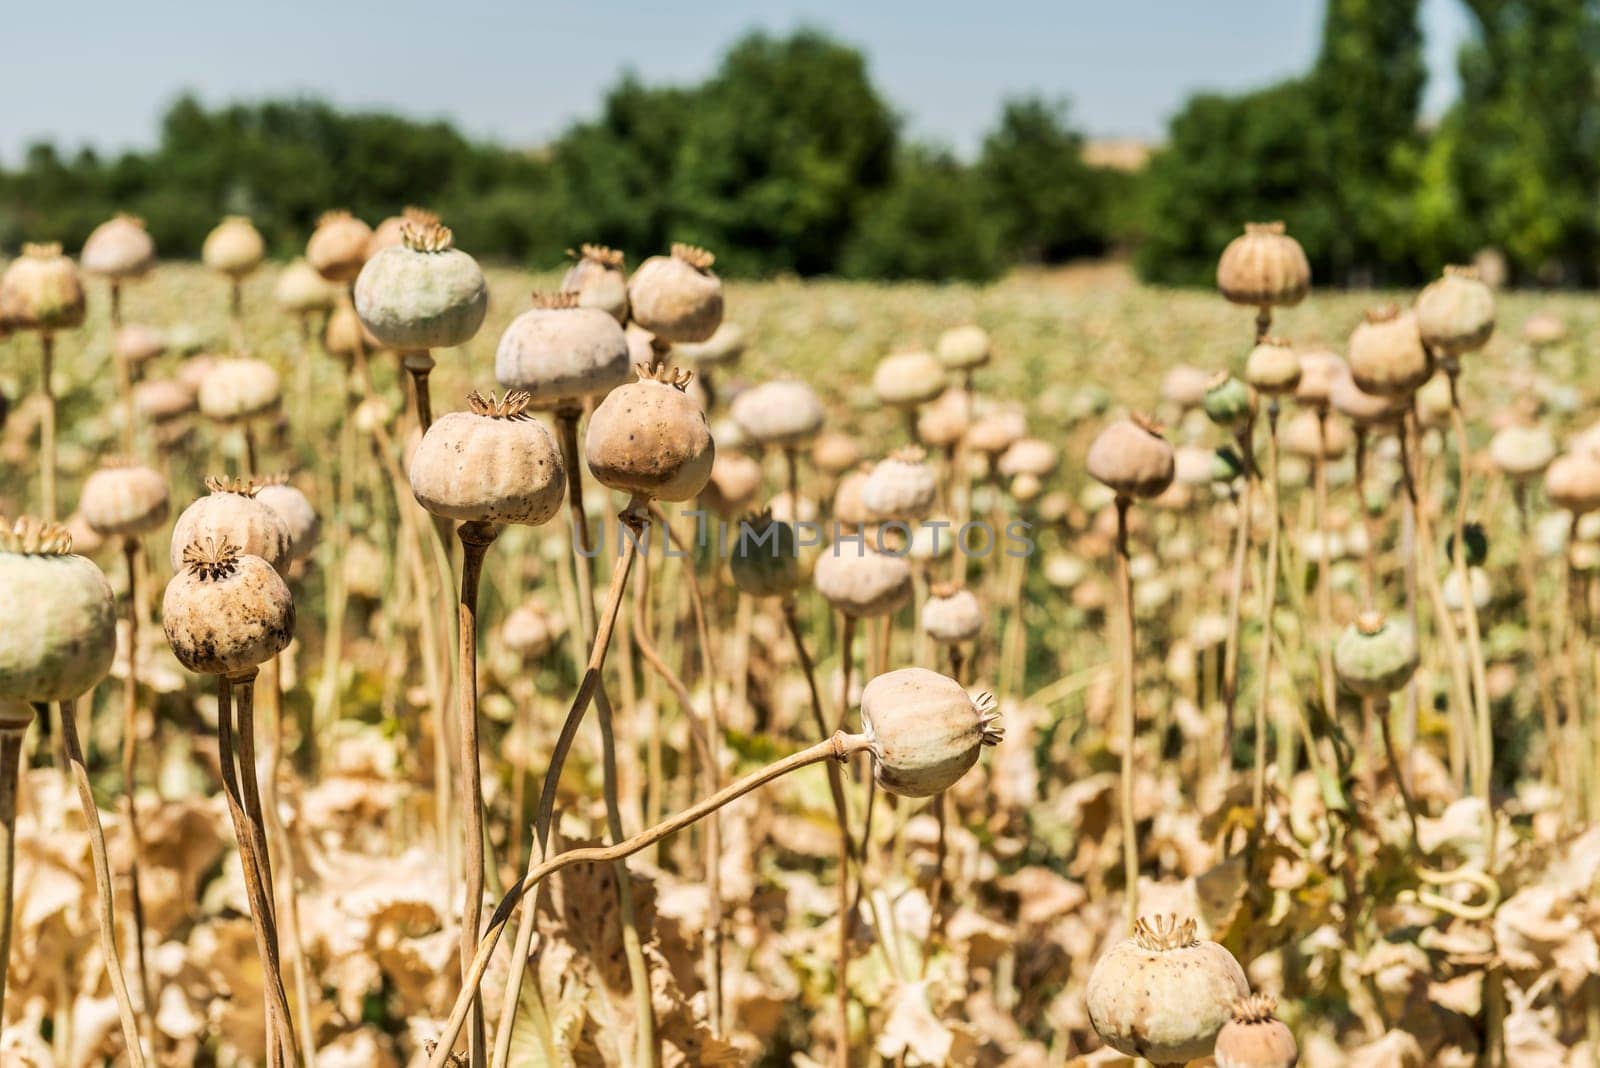 Opium poppies, They are watching you.